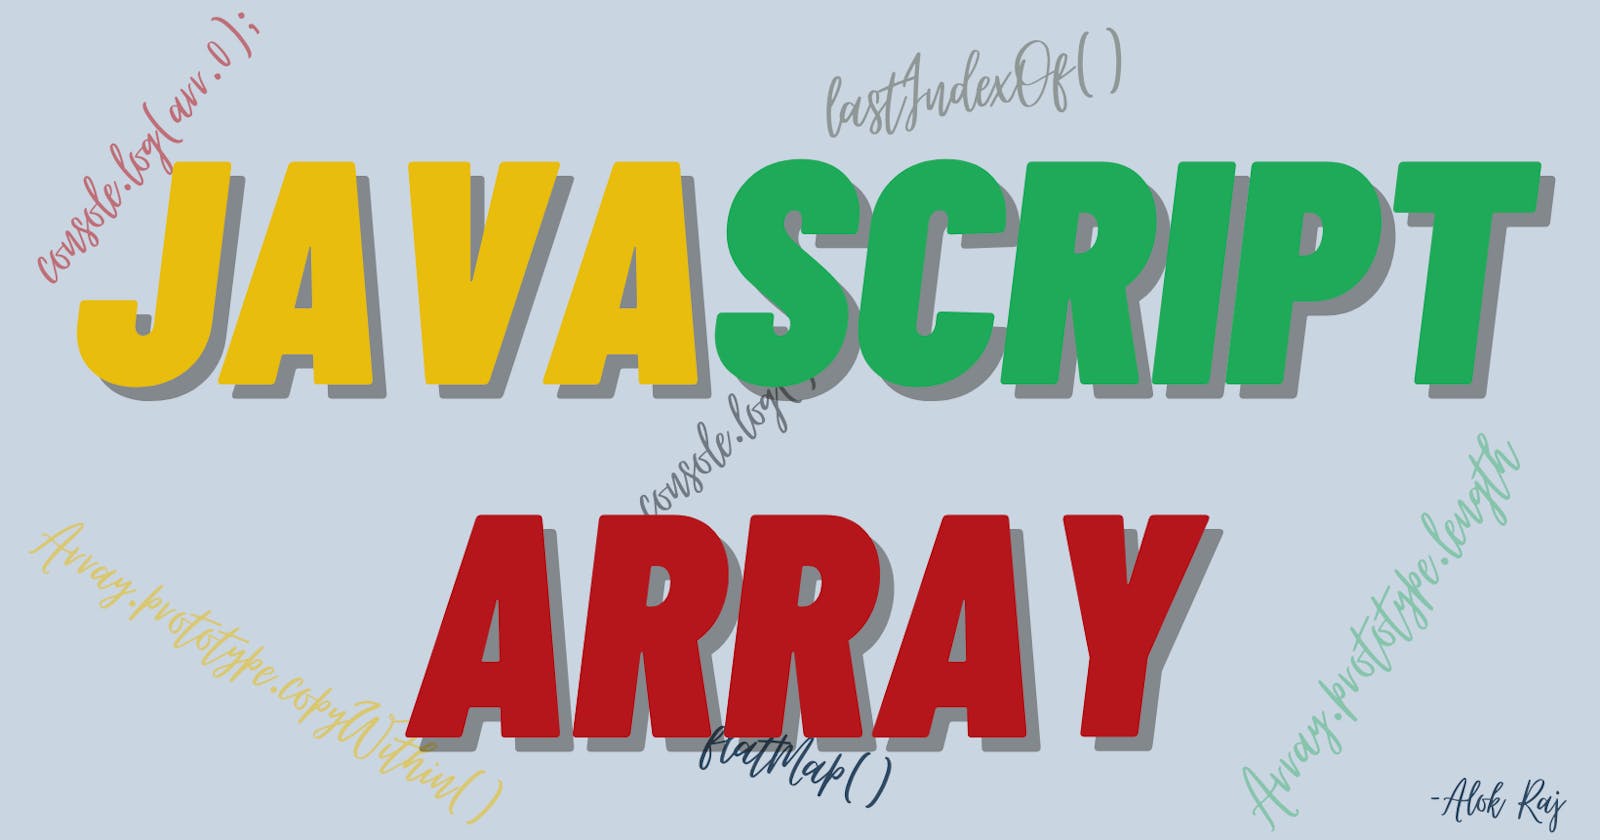 Array and its predefined functions in JAVASCRIPT